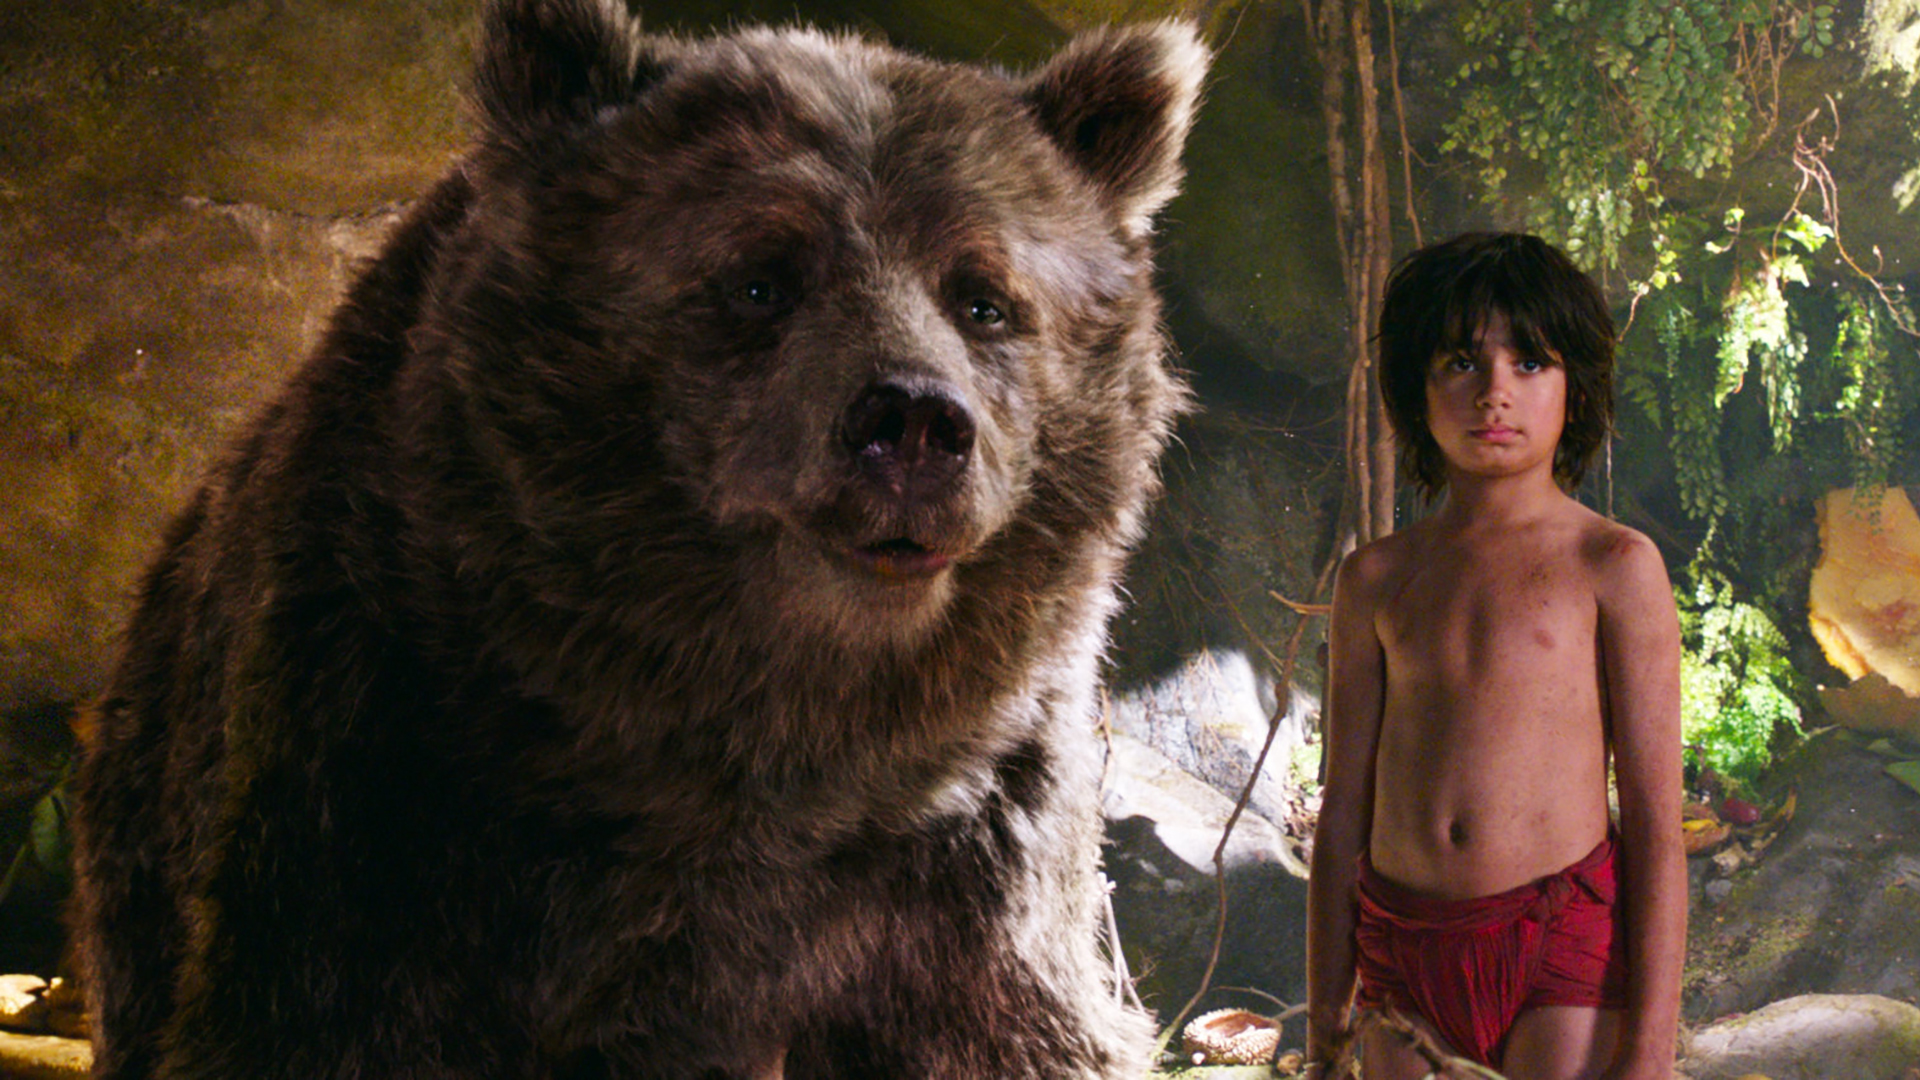 The Jungle Book download the new for ios